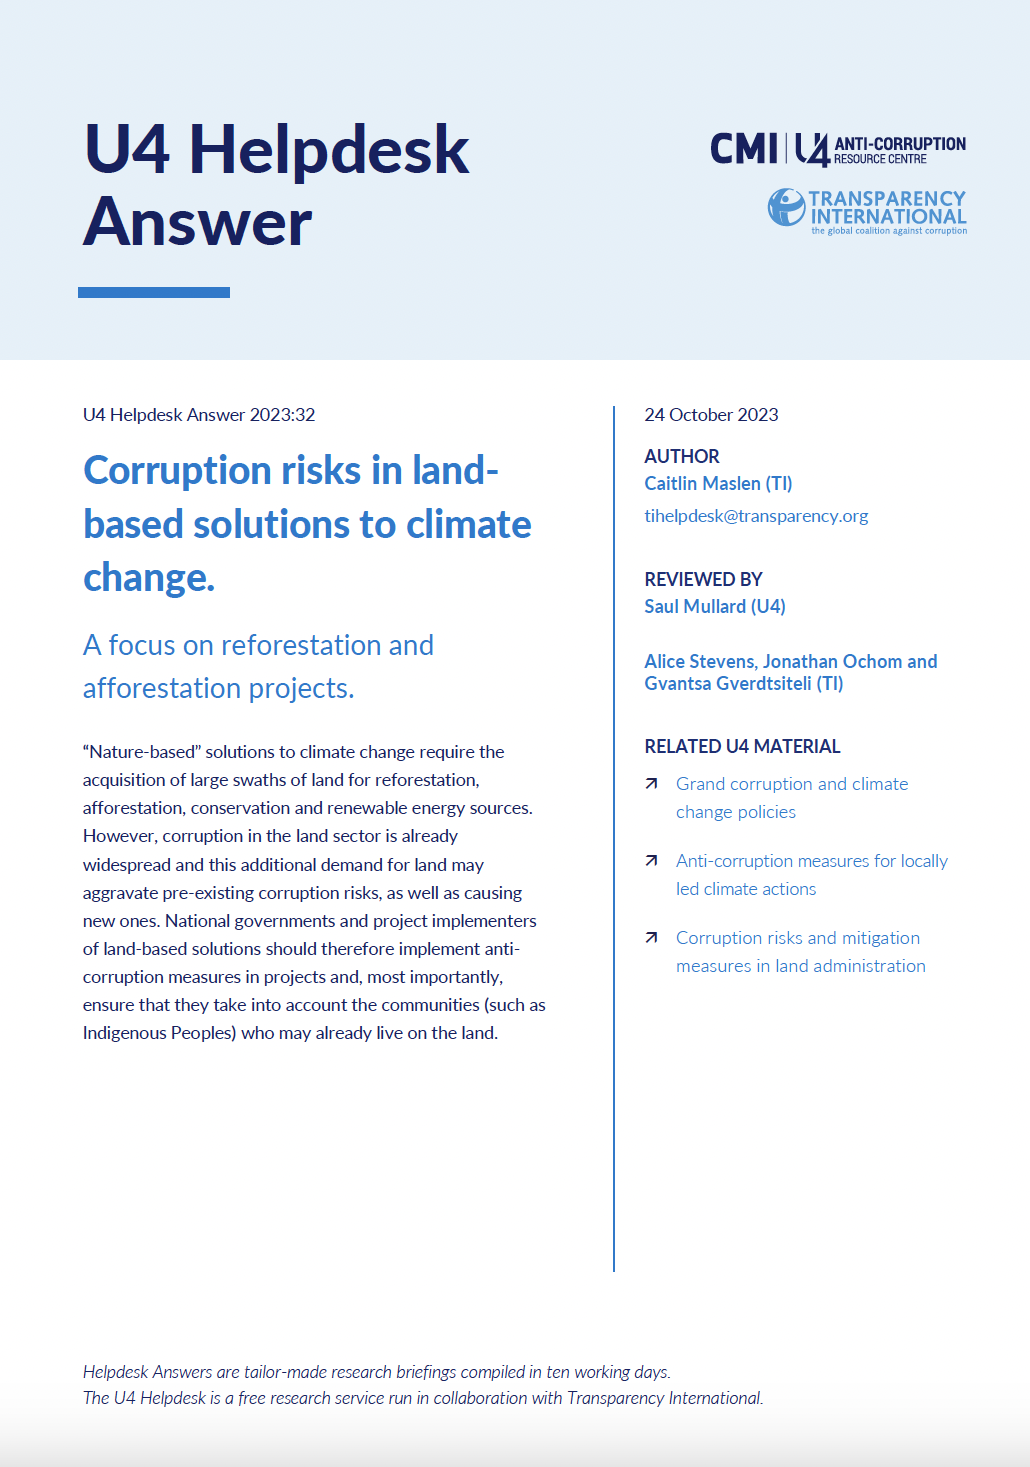 Corruption risks in land-based solutions to climate change